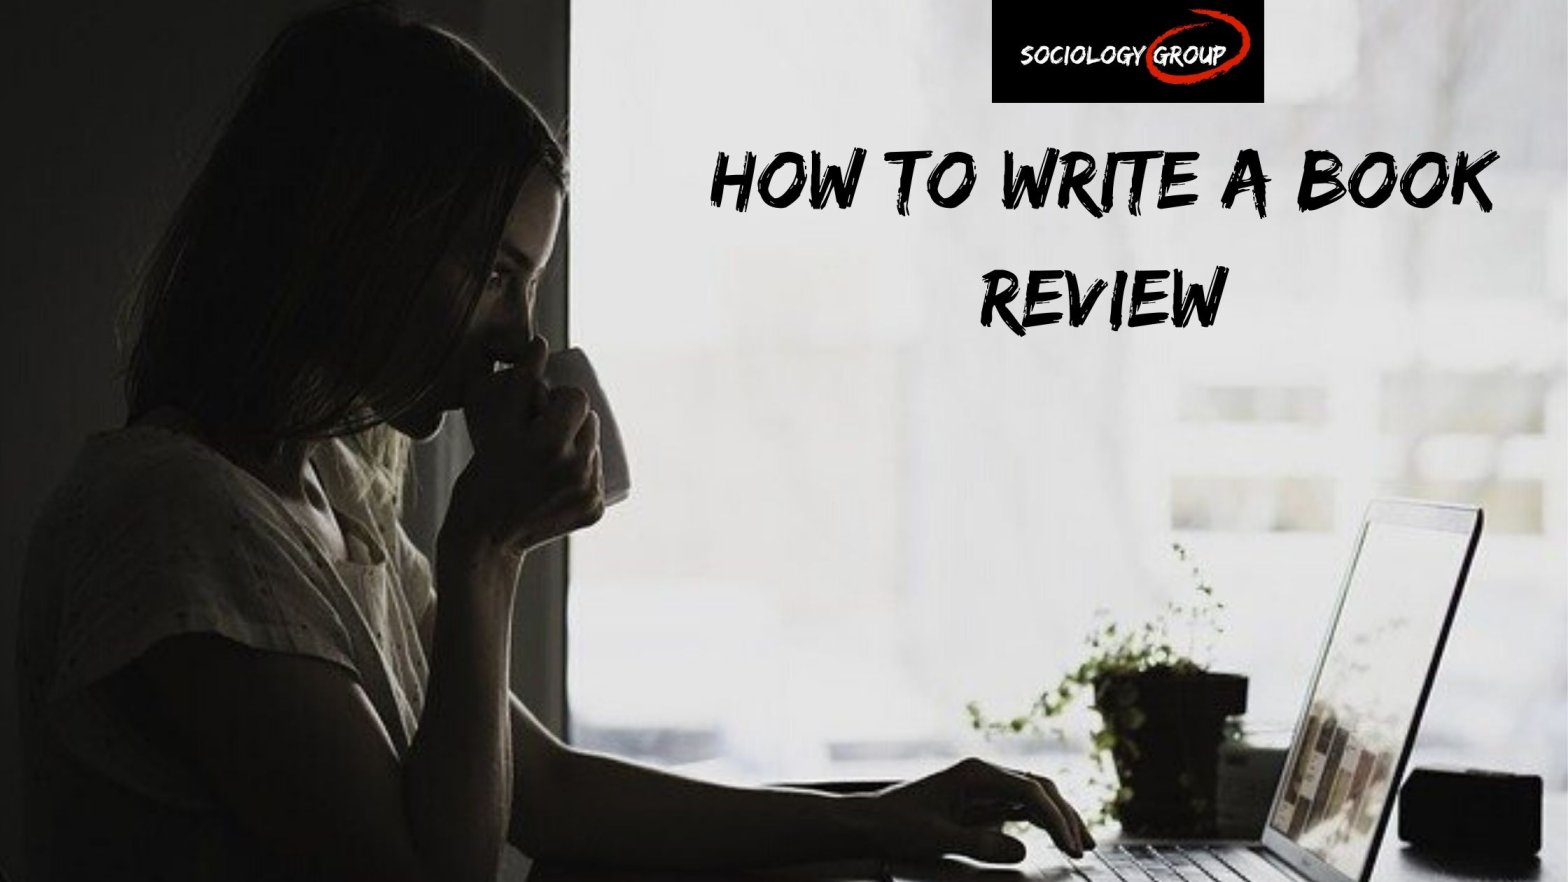 How to write Sociological book review